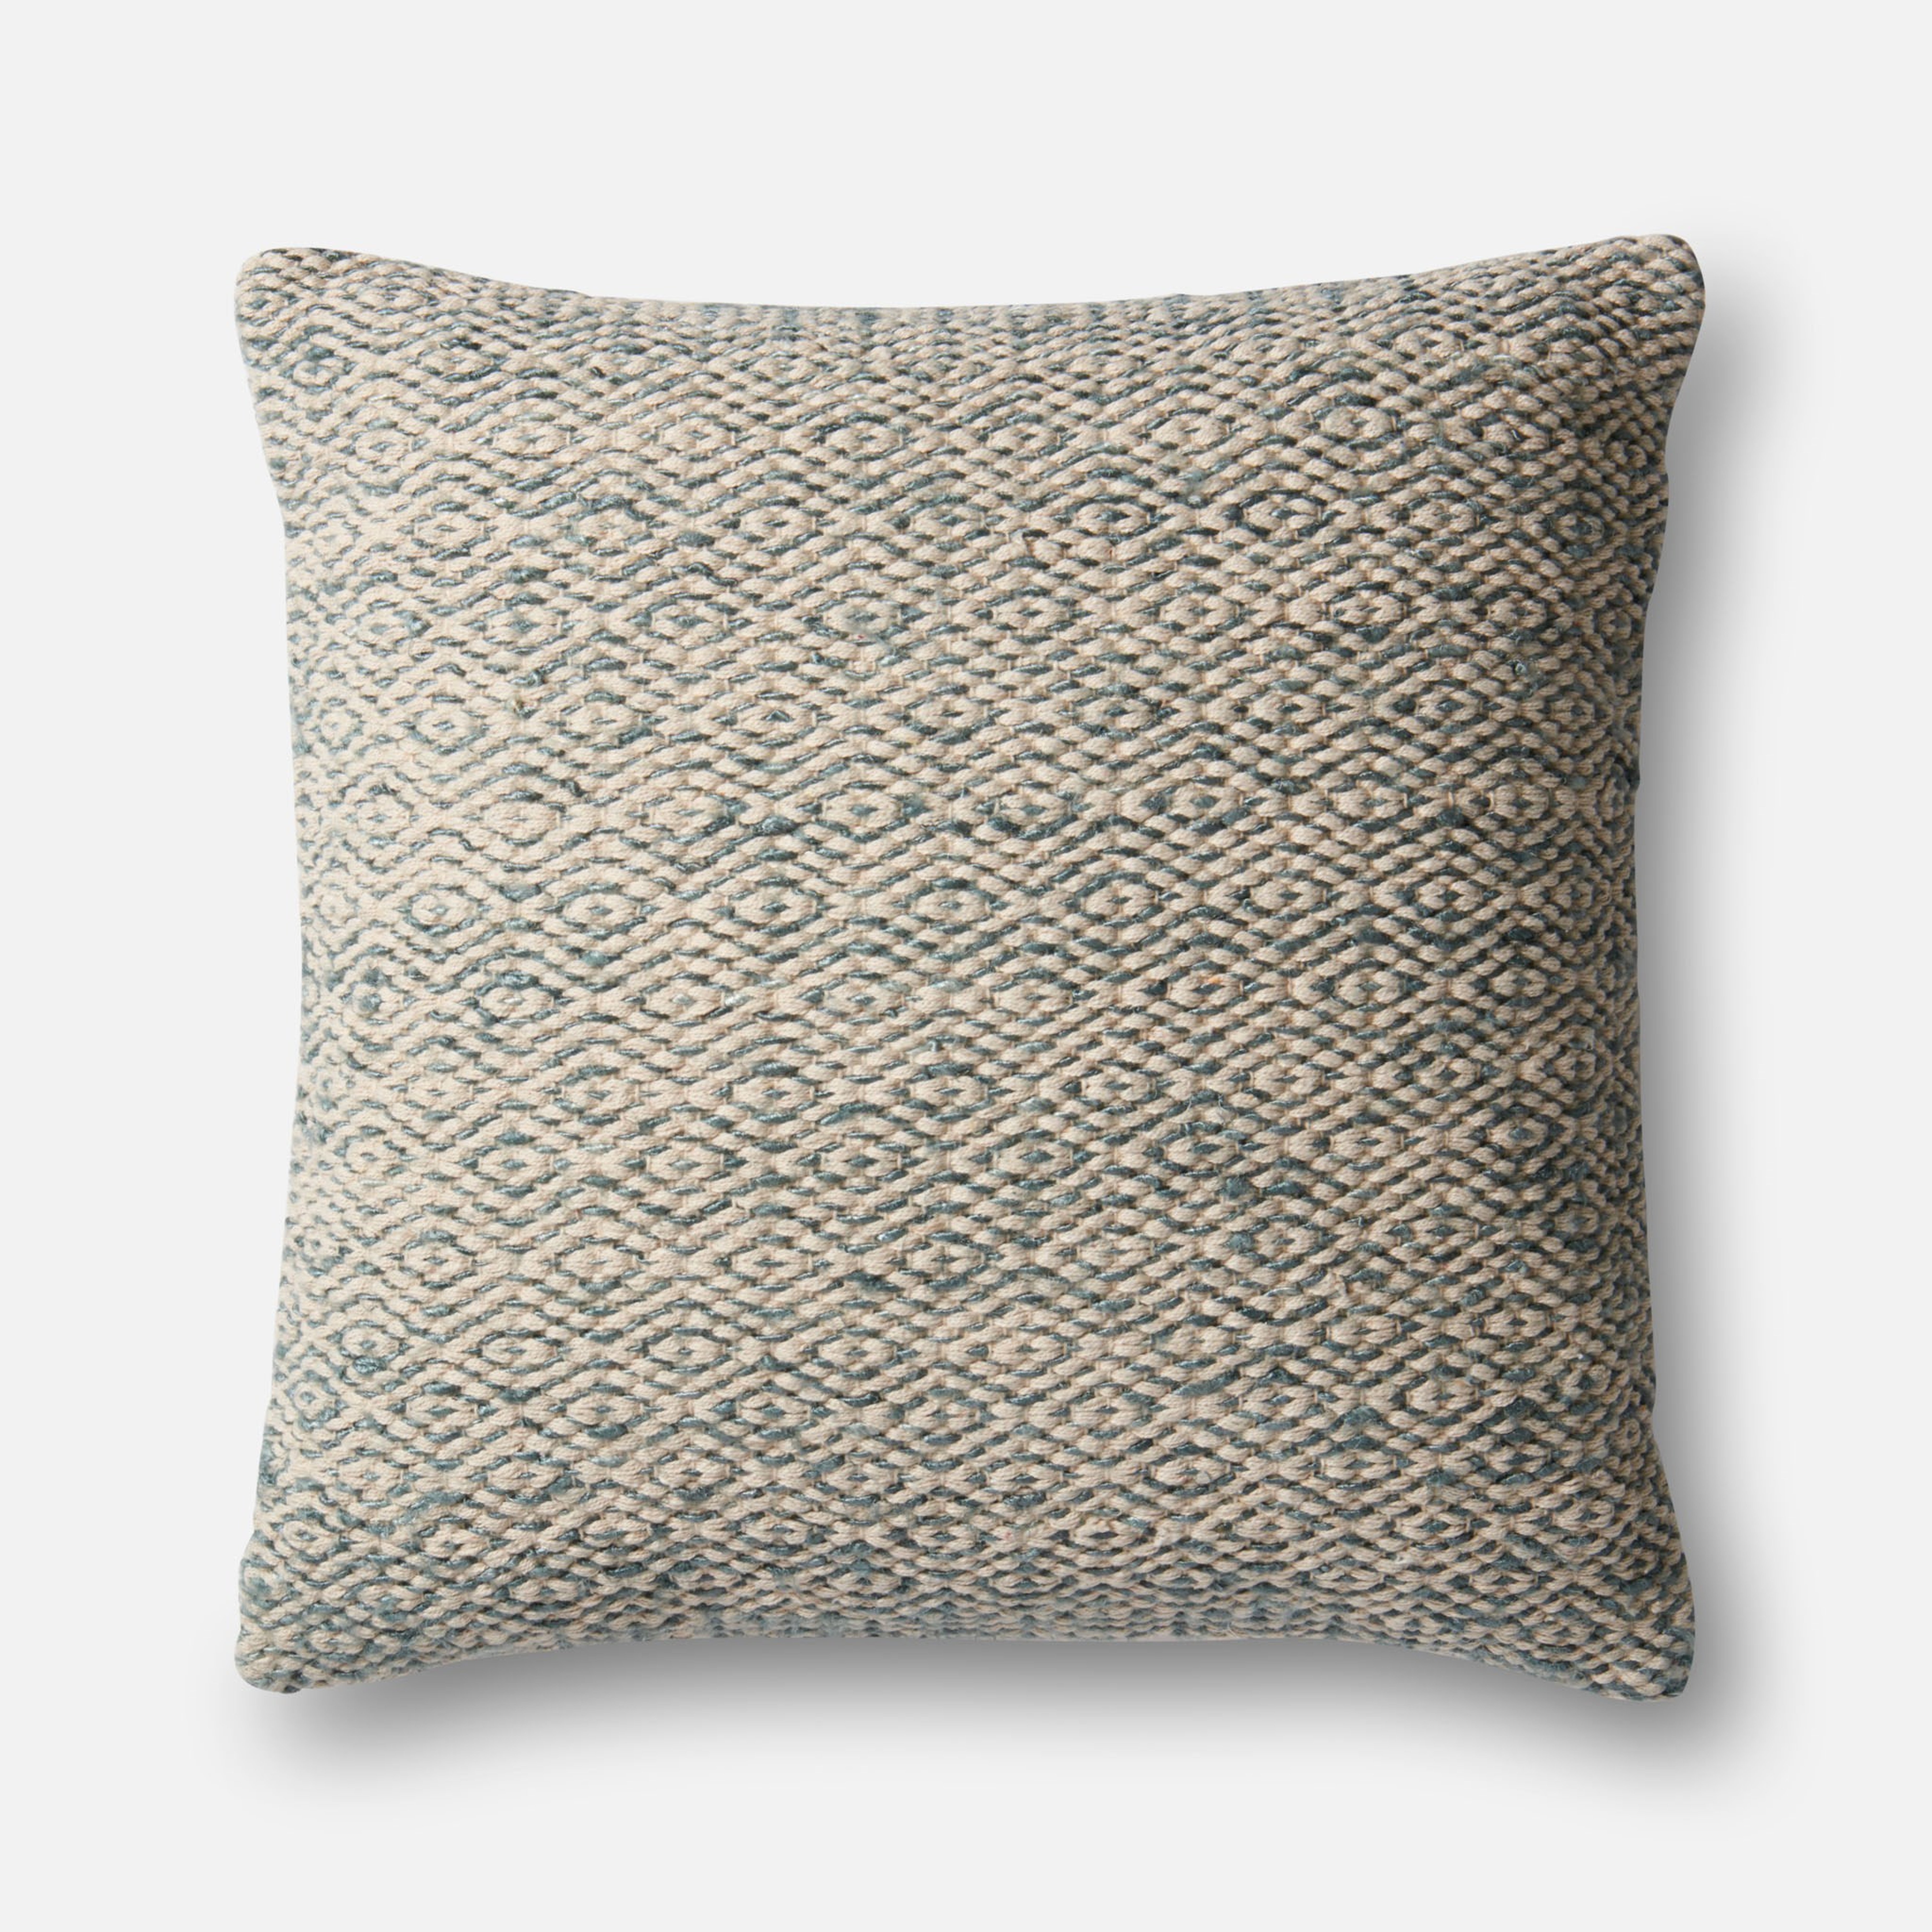 PILLOWS - GREY - Magnolia Home by Joana Gaines Crafted by Loloi Rugs